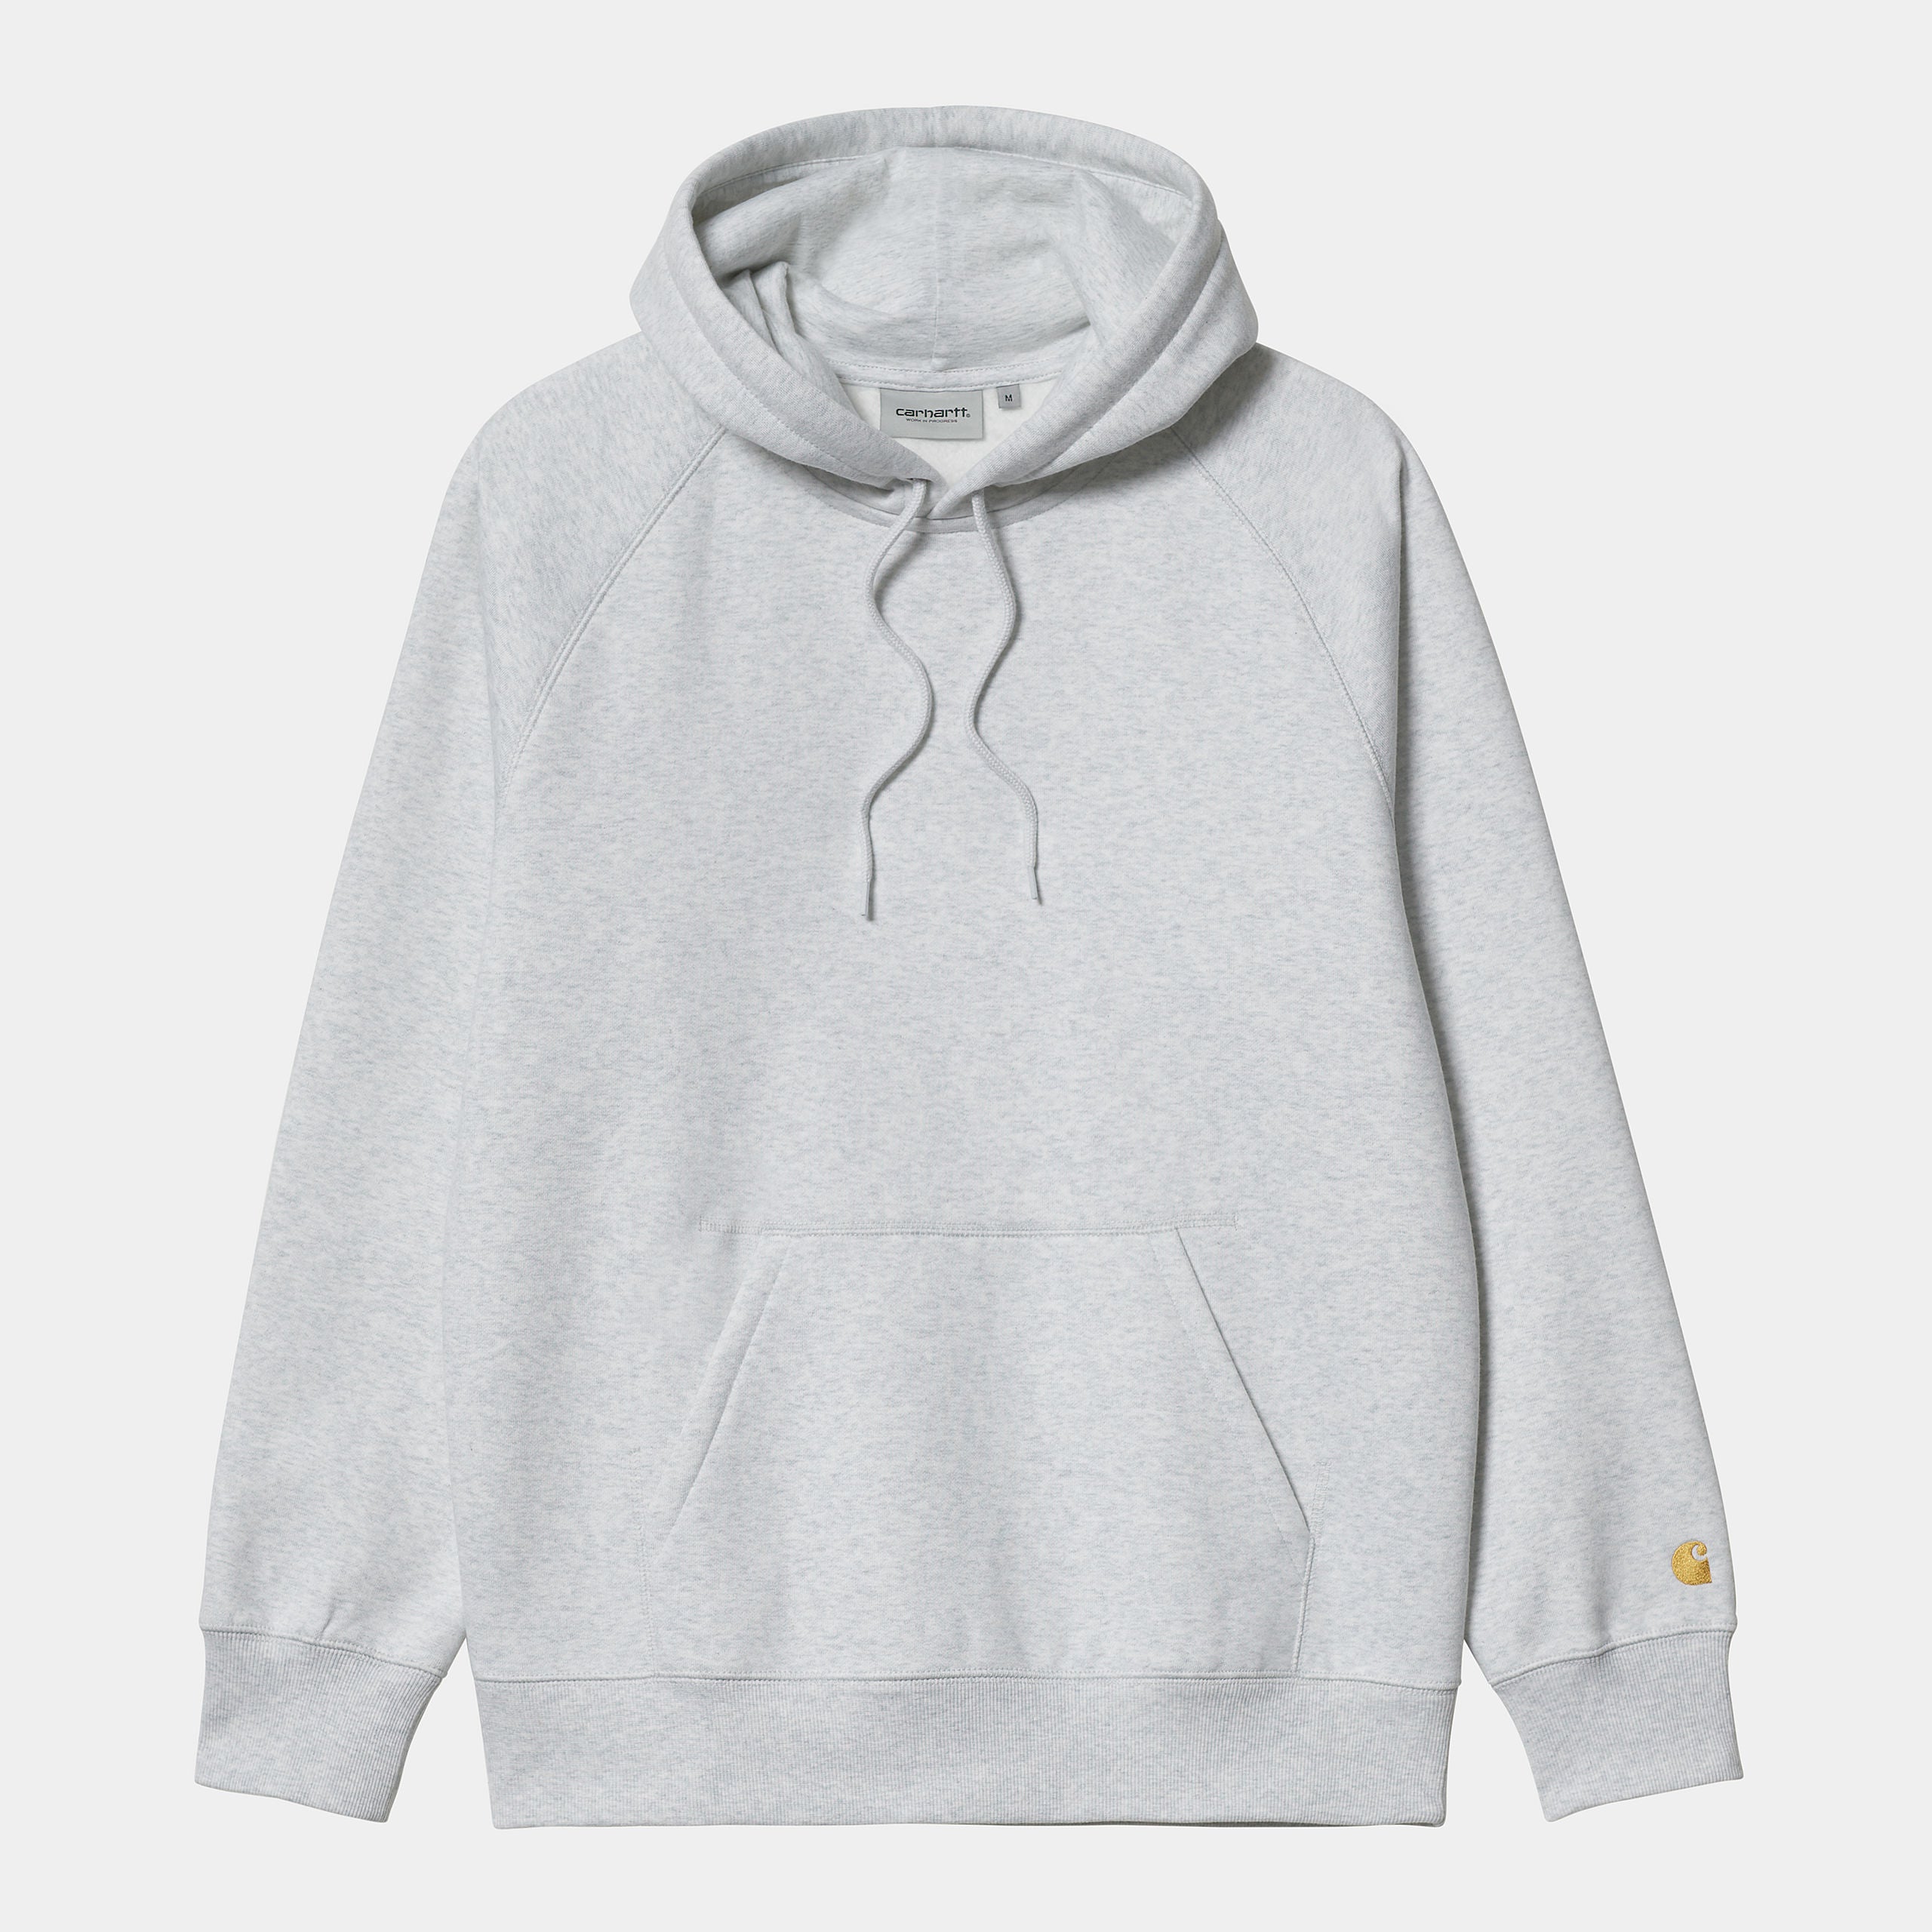 Carhartt WIP Hooded Chase Sweat - Ash Heather / Gold product